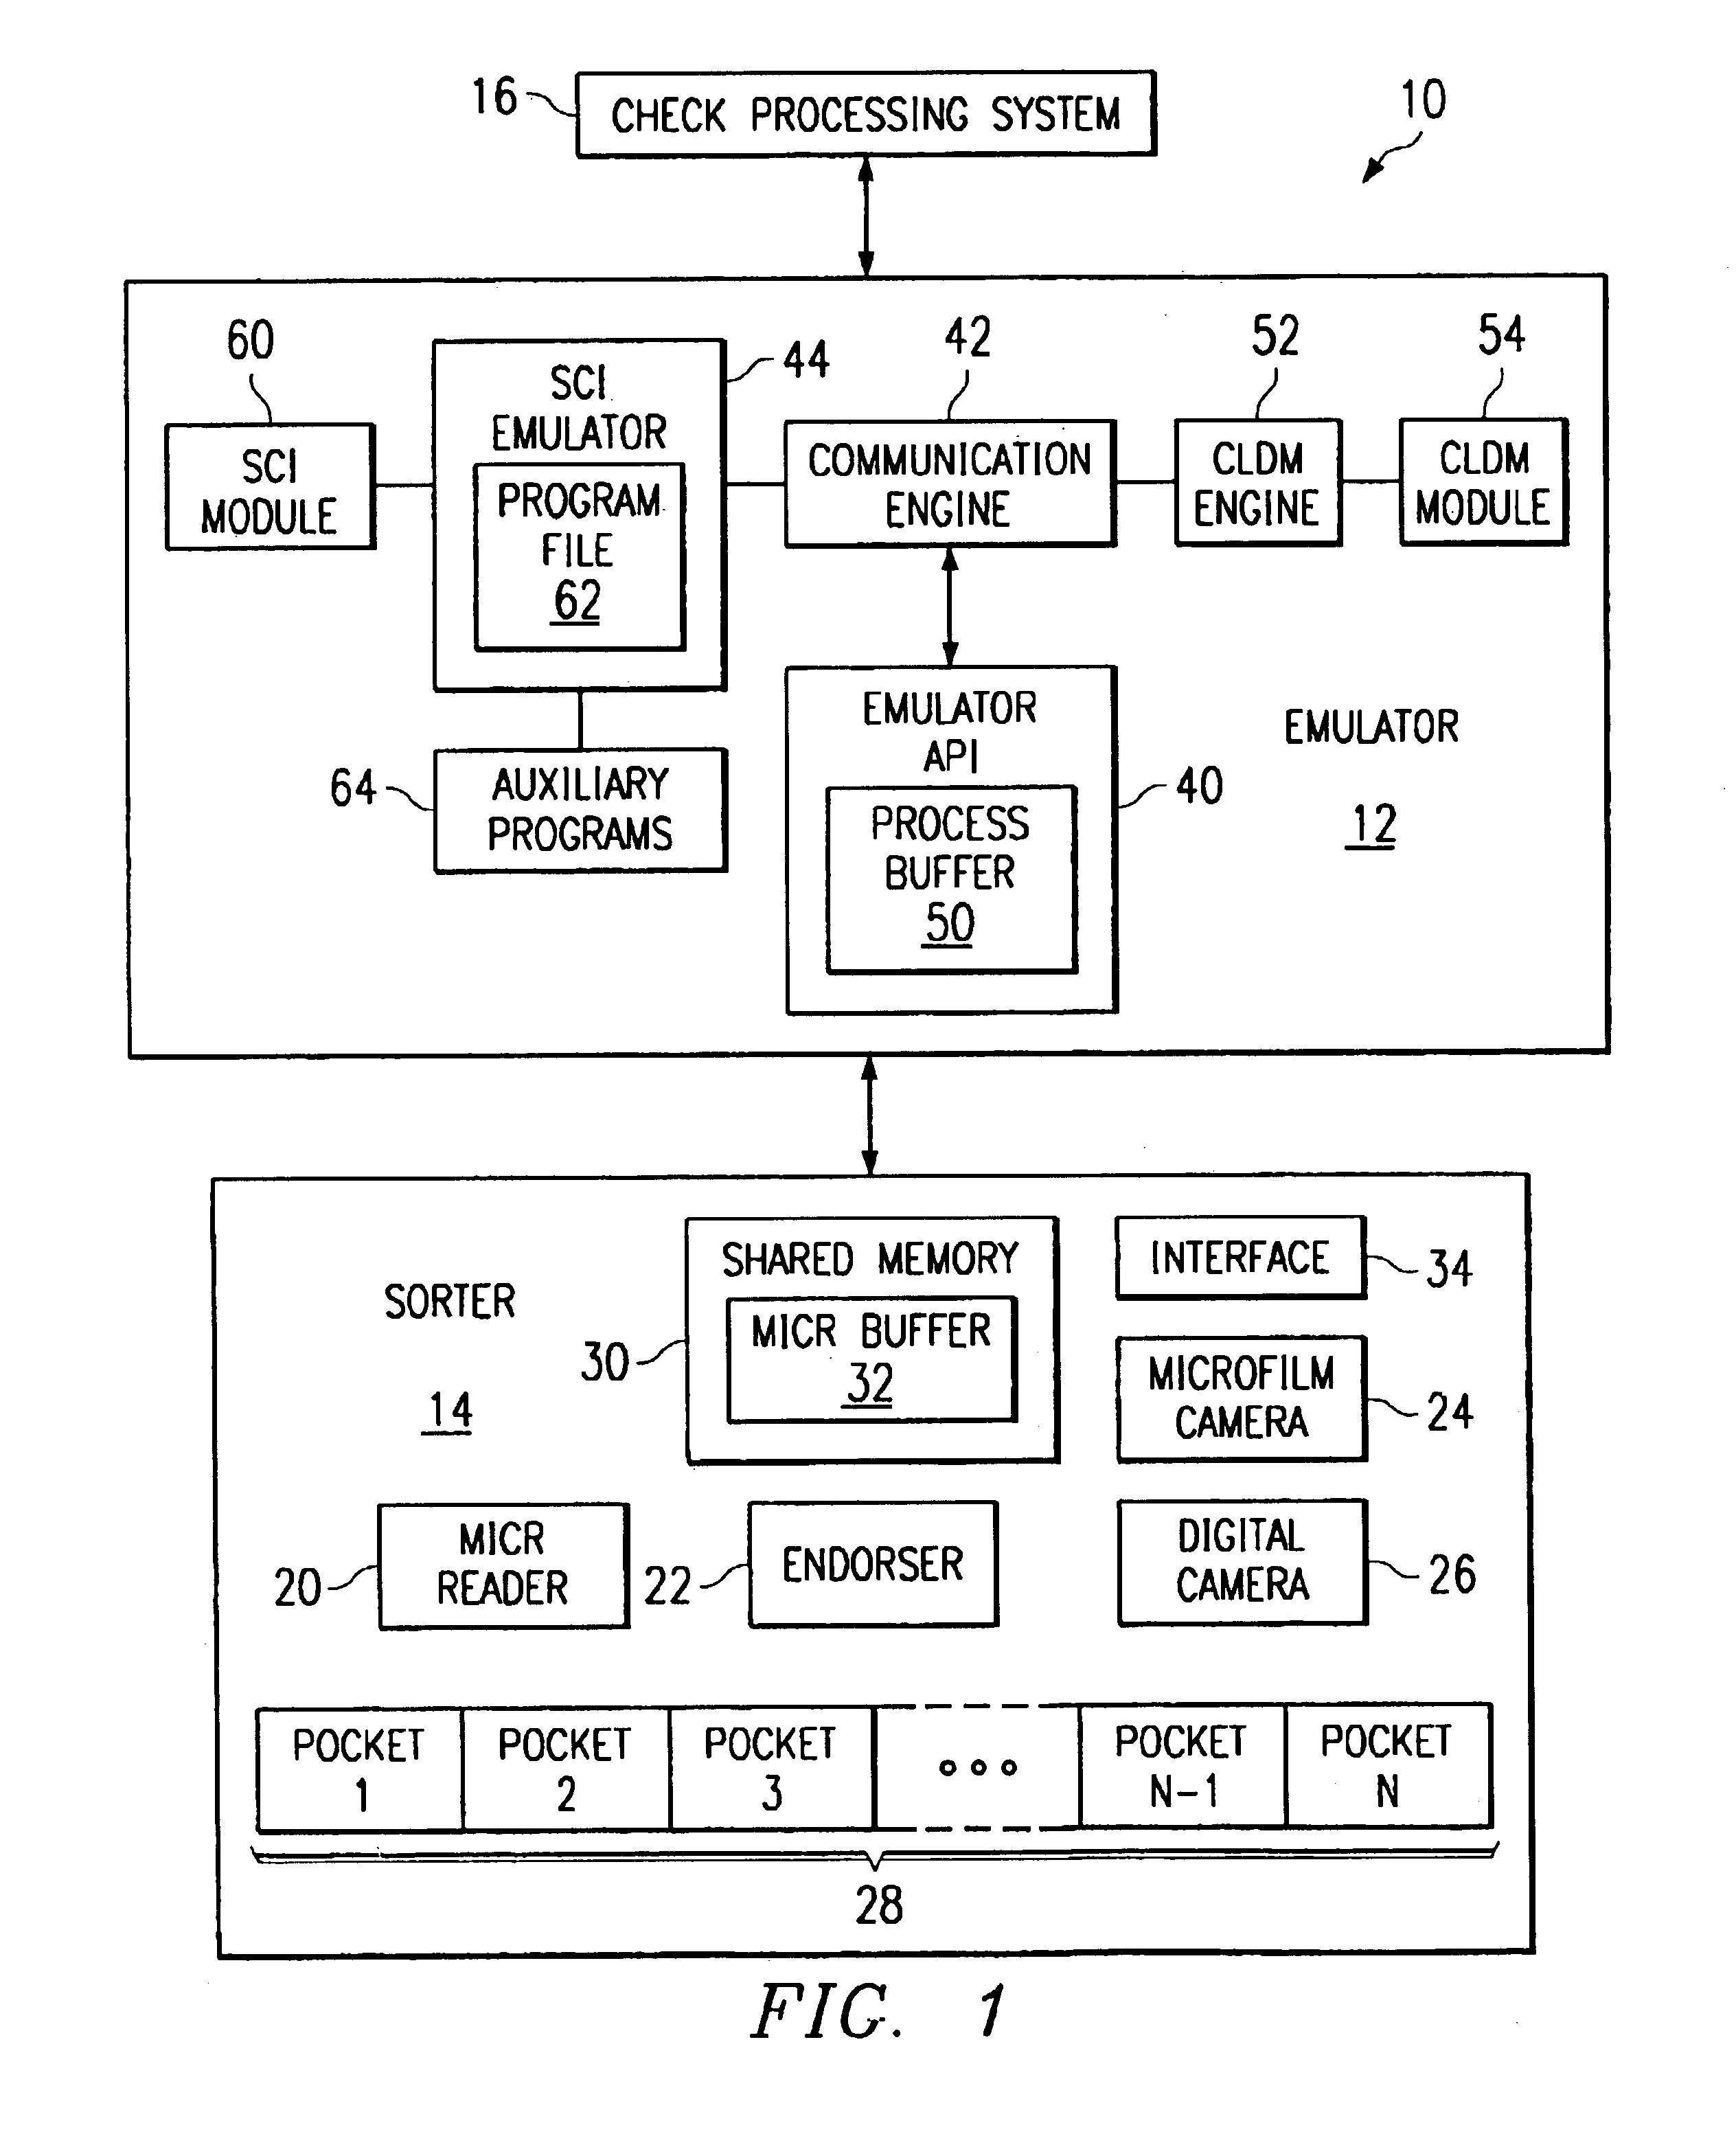 Method and system for online communication between a check sorter and a check processing system